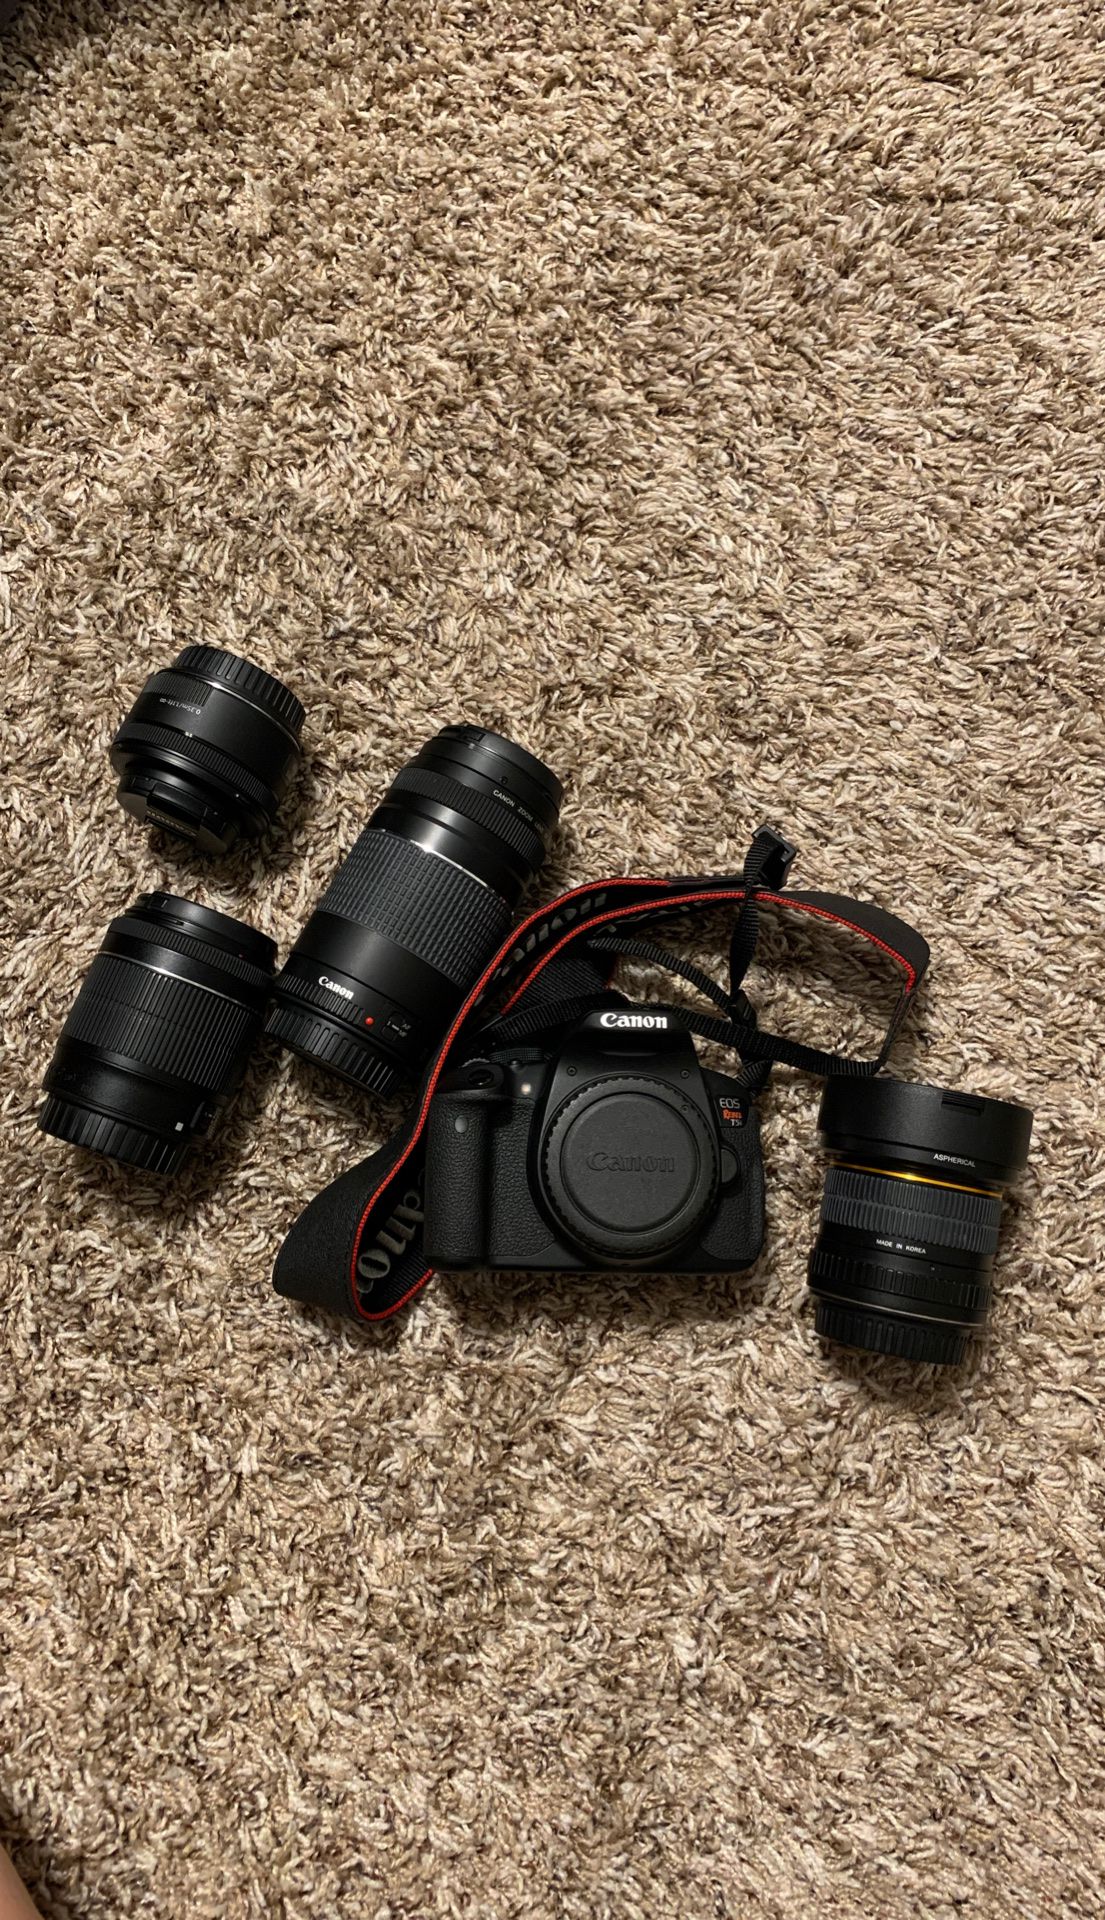 Canon rebel t5i with kit lens